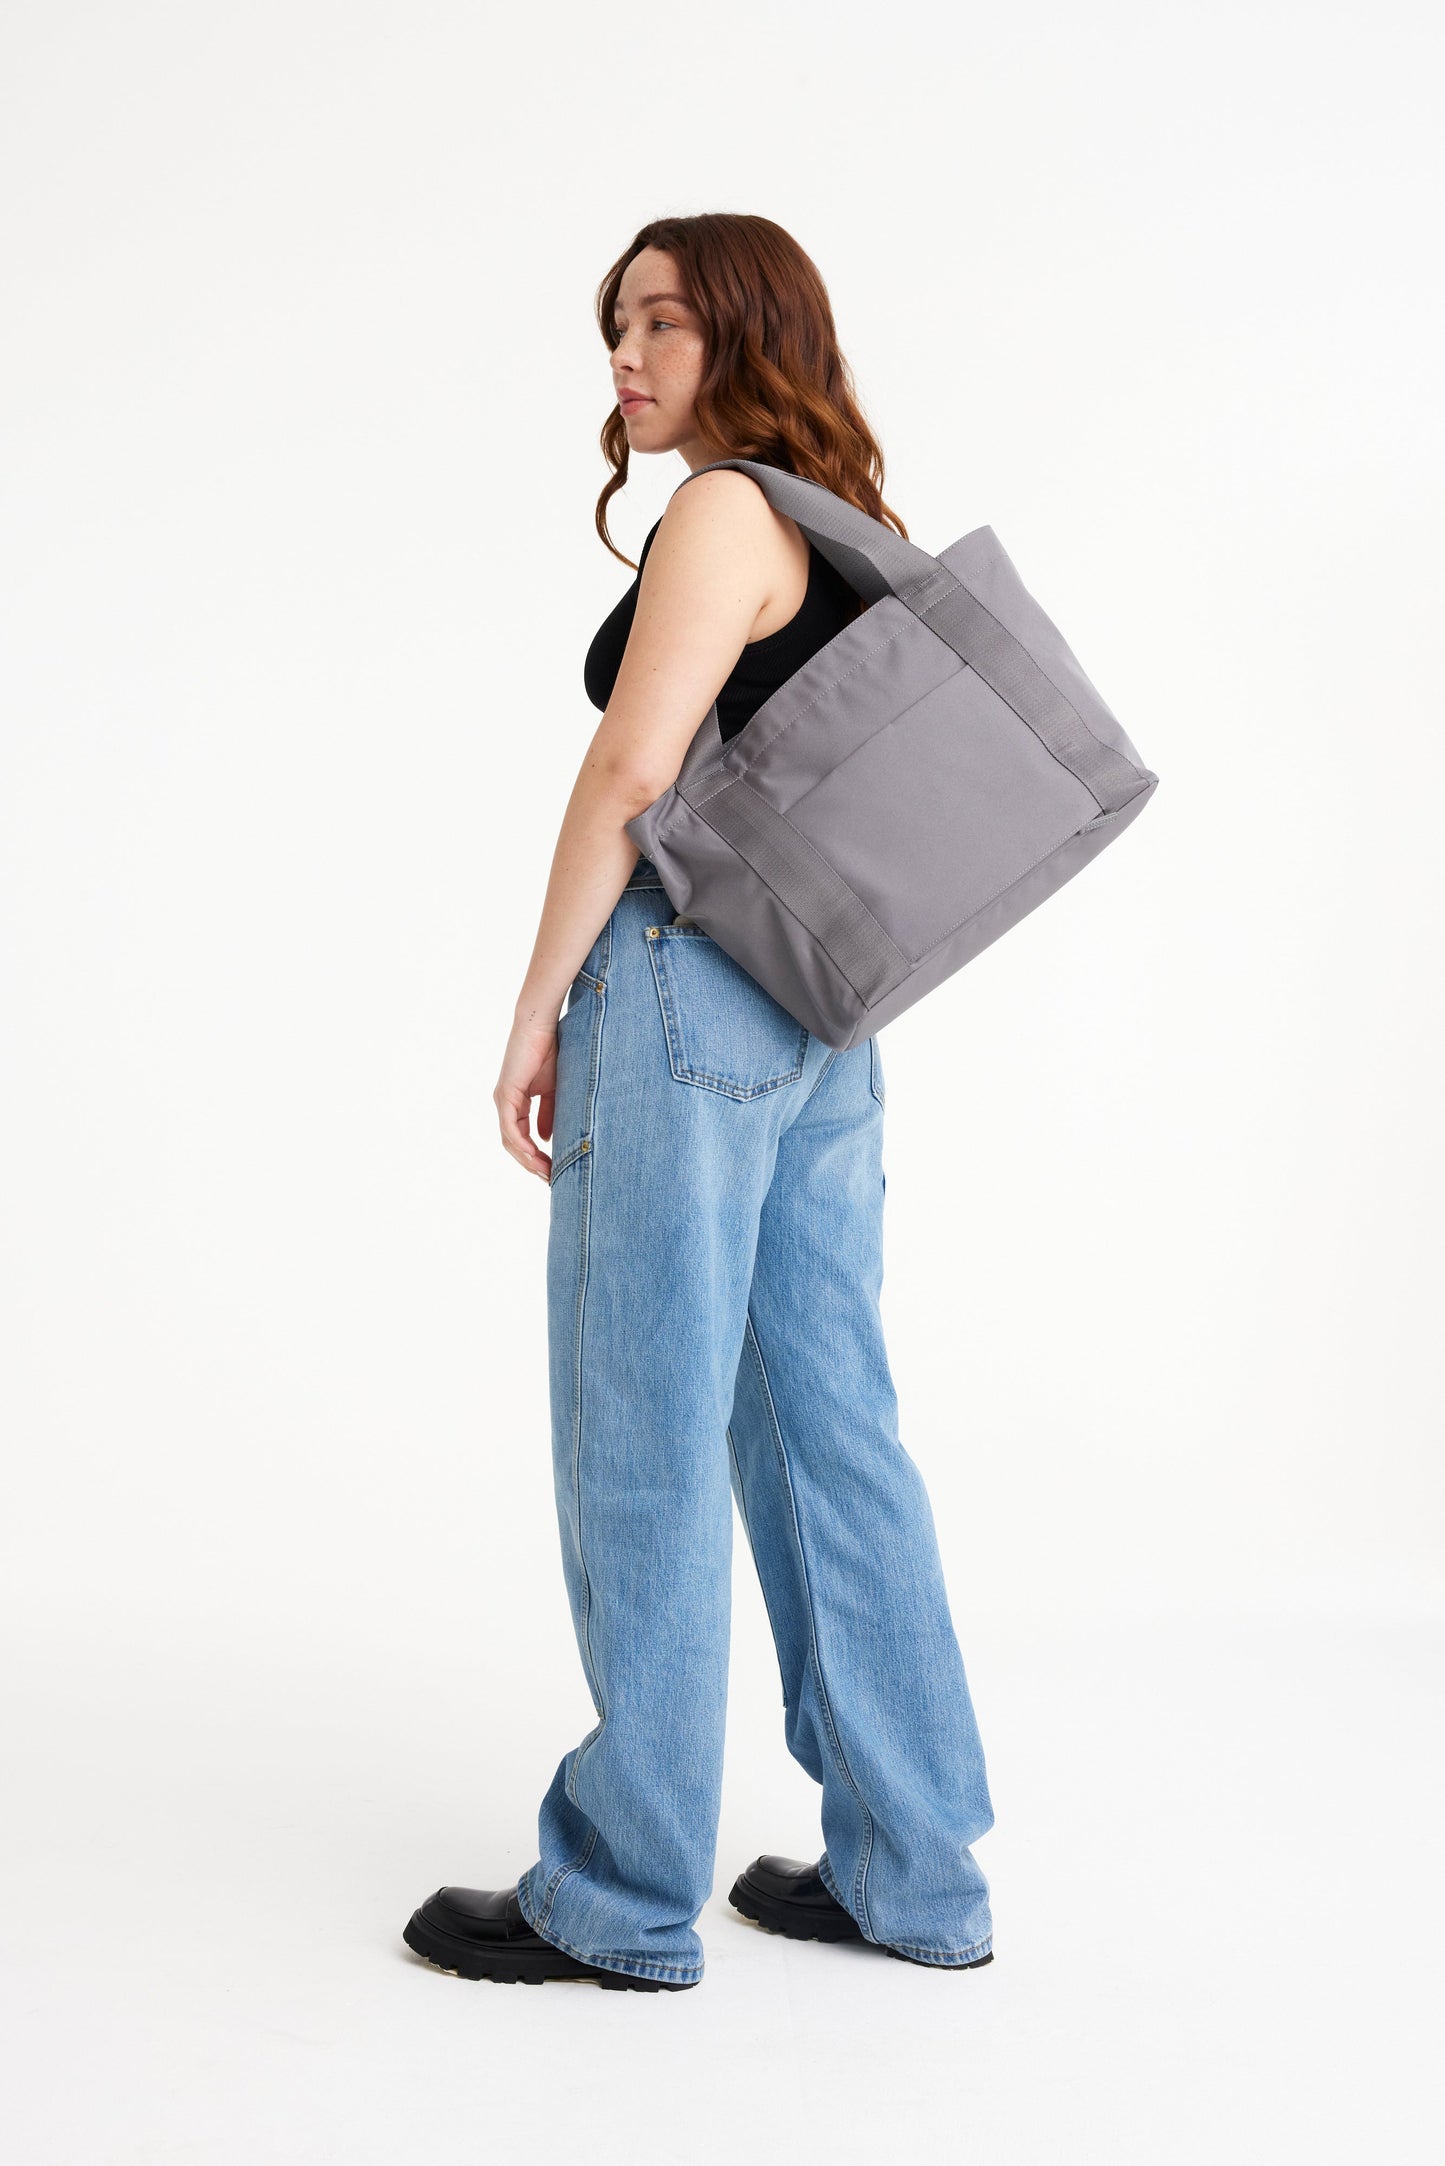 The BÉISics Tote in Grey